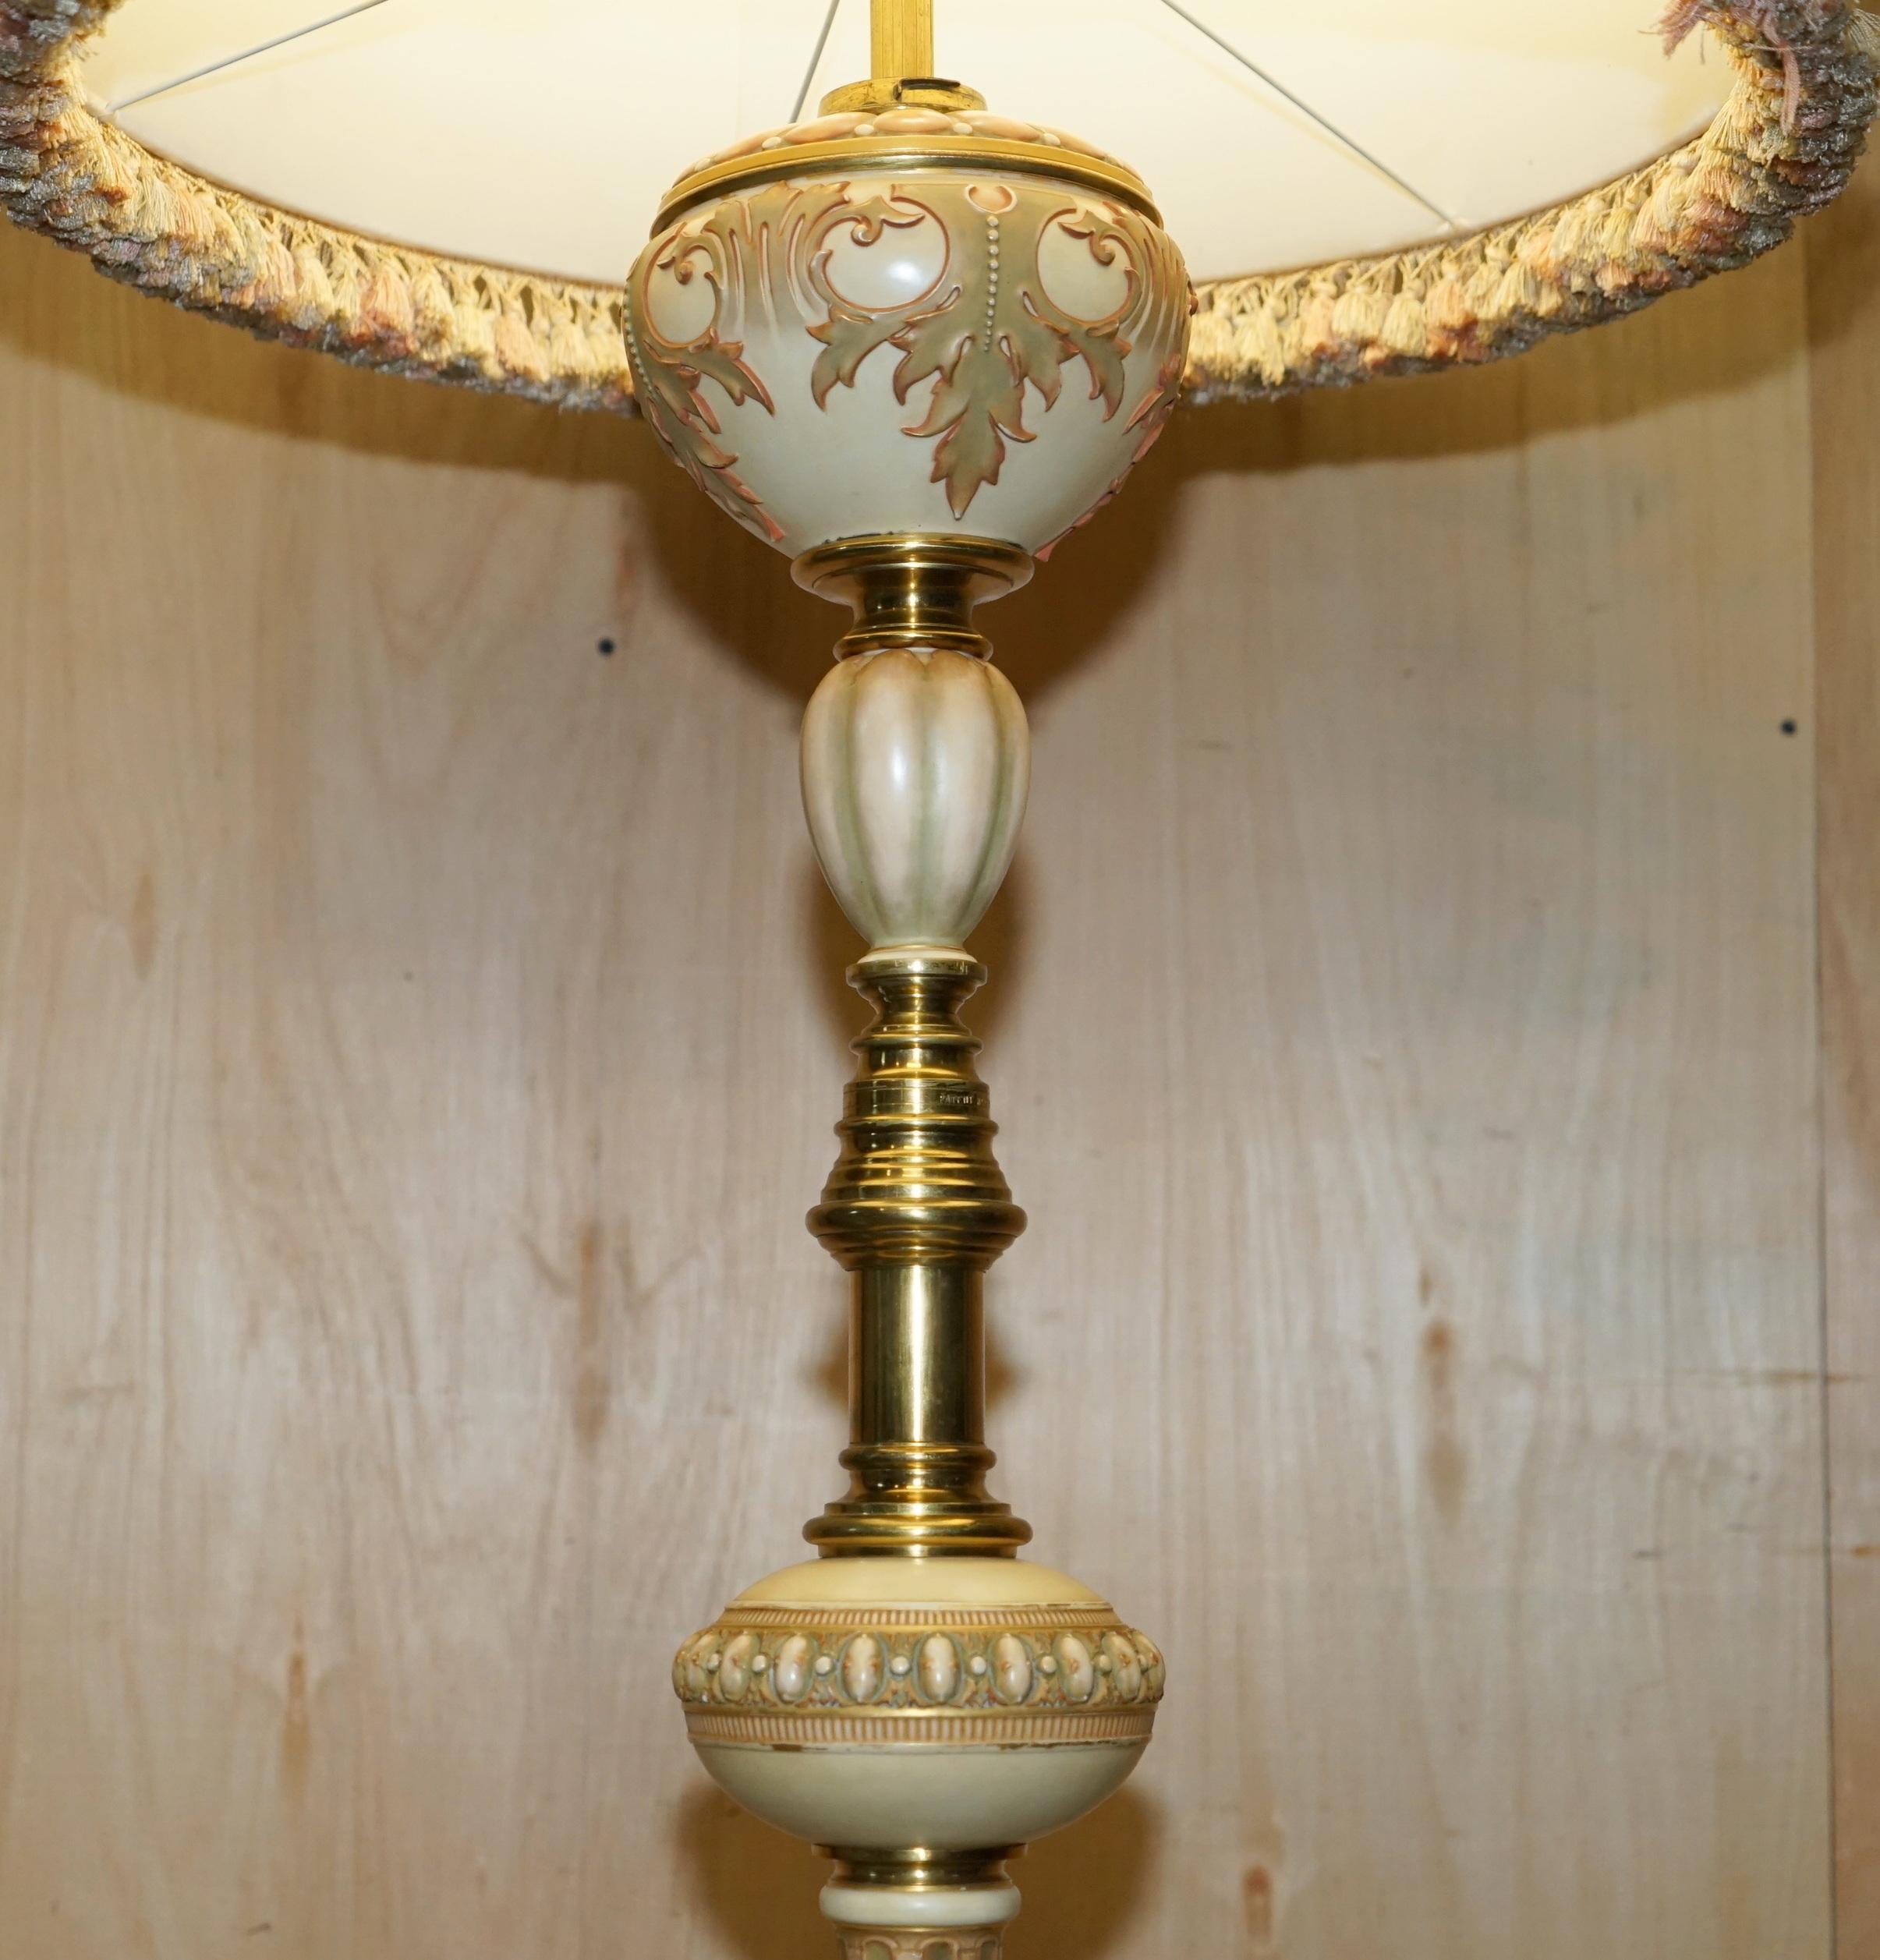 1890 ROYAL WORCESTER FULLY STAMPED ANTIQUE ViCTORIAN FLOOR STANDING LAMP For Sale 2